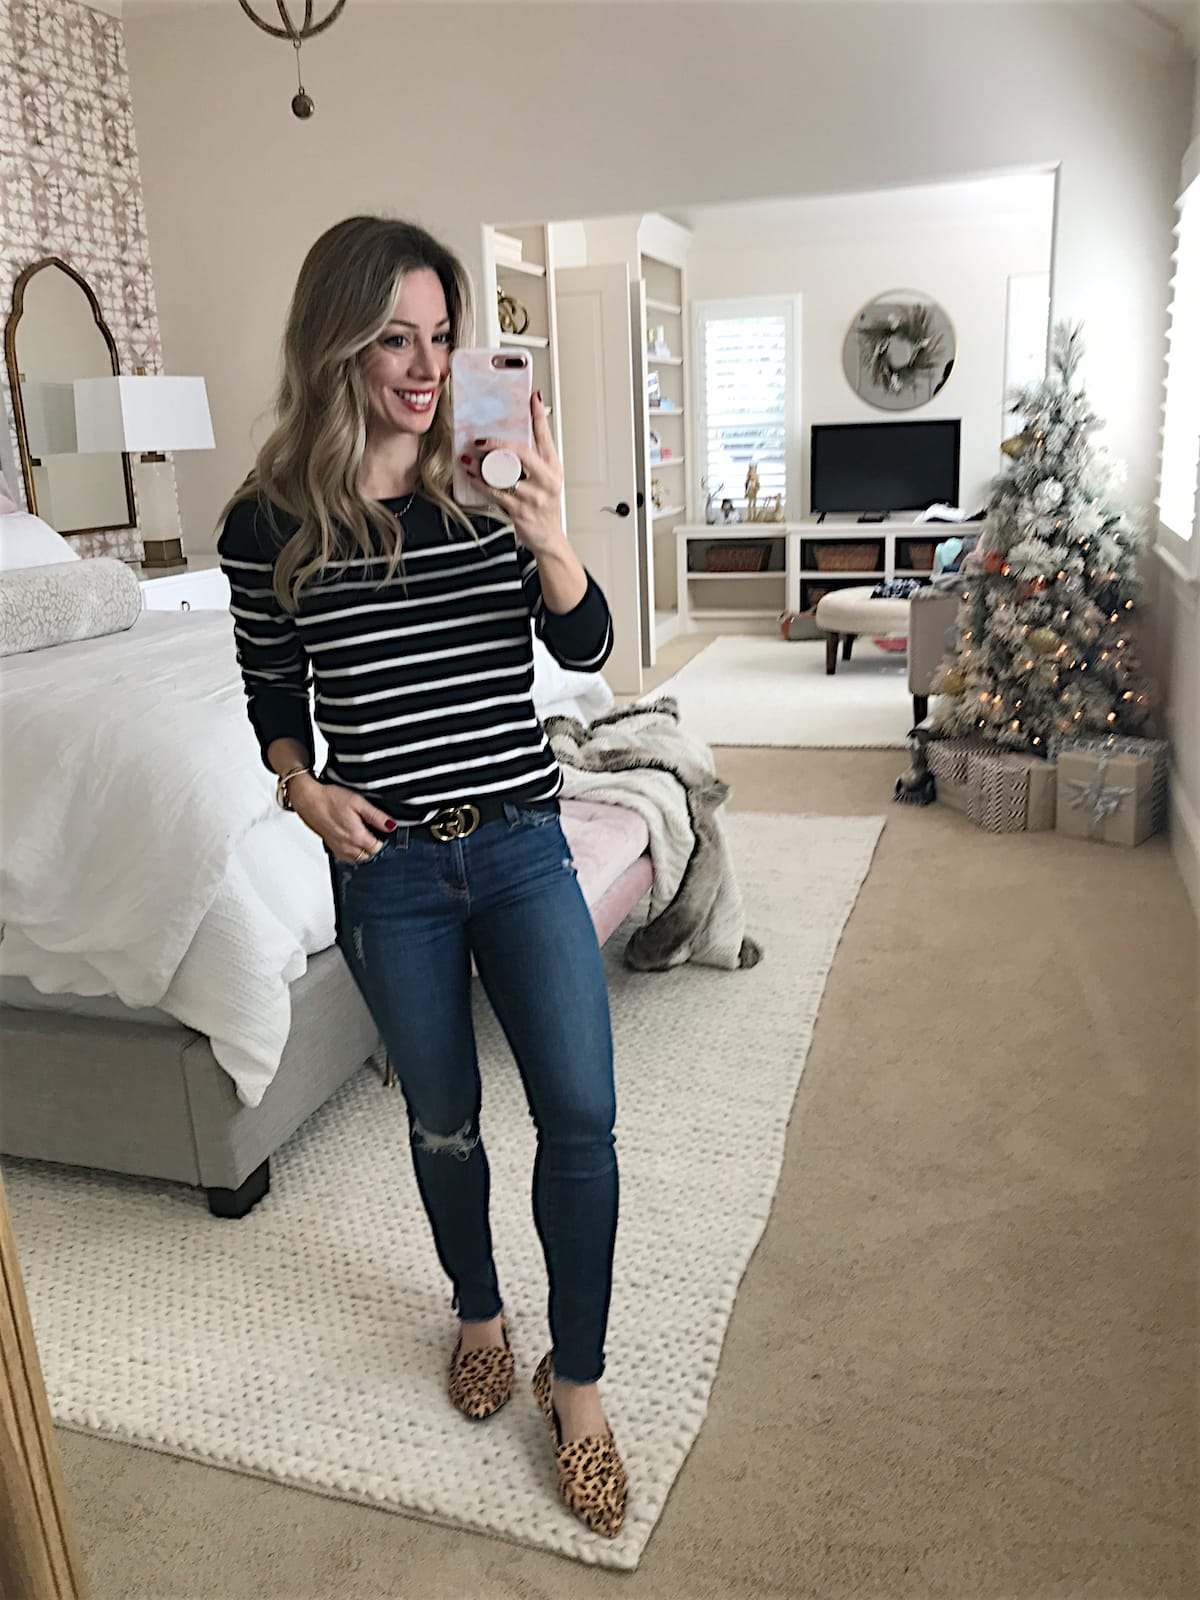 Amazon Fashion Haul - jeans and striped pullover